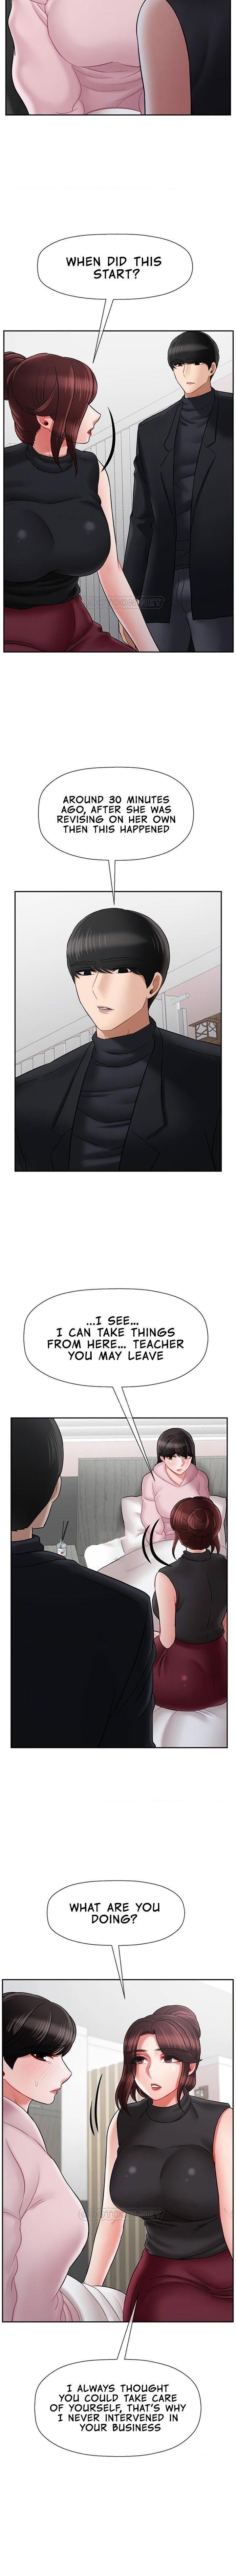 physical-classroom-chap-33-2